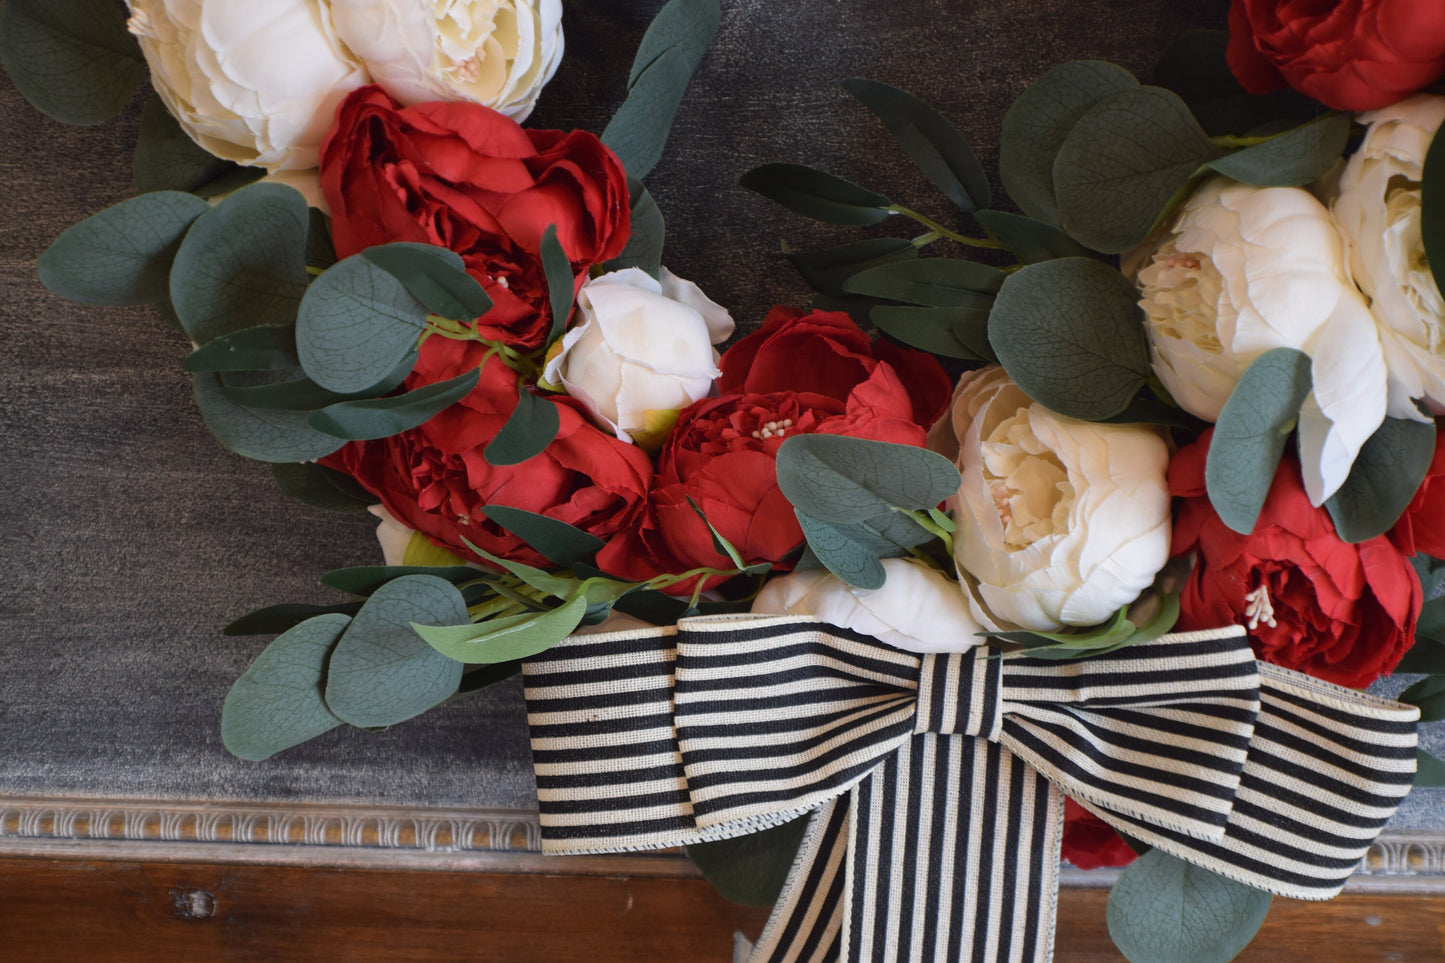 The Red and White Peony Wreath